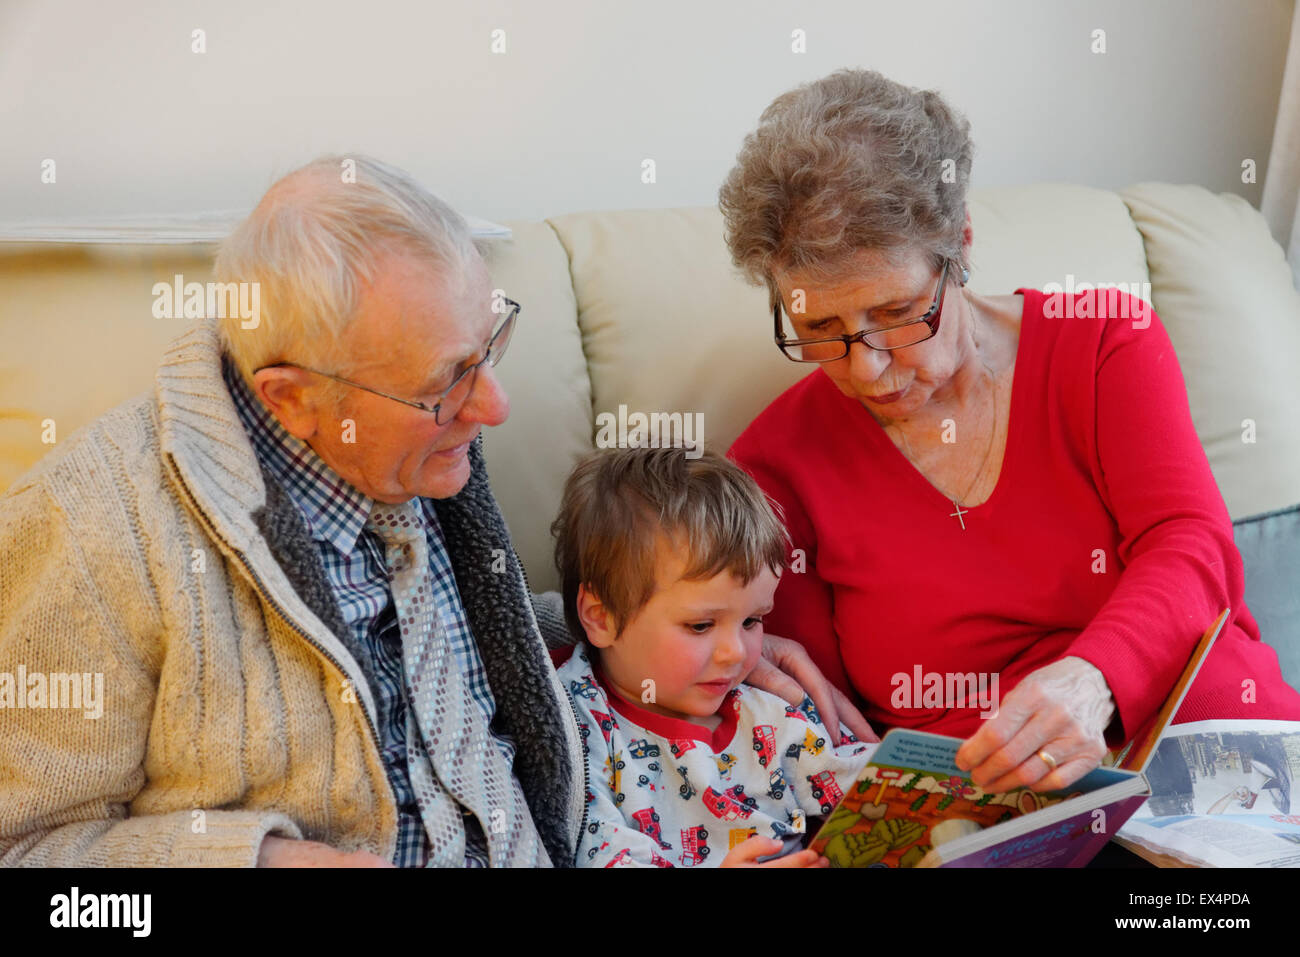 A toddler (3 yrs old) in pyjamas having a bedtime story with his grandparents Stock Photo